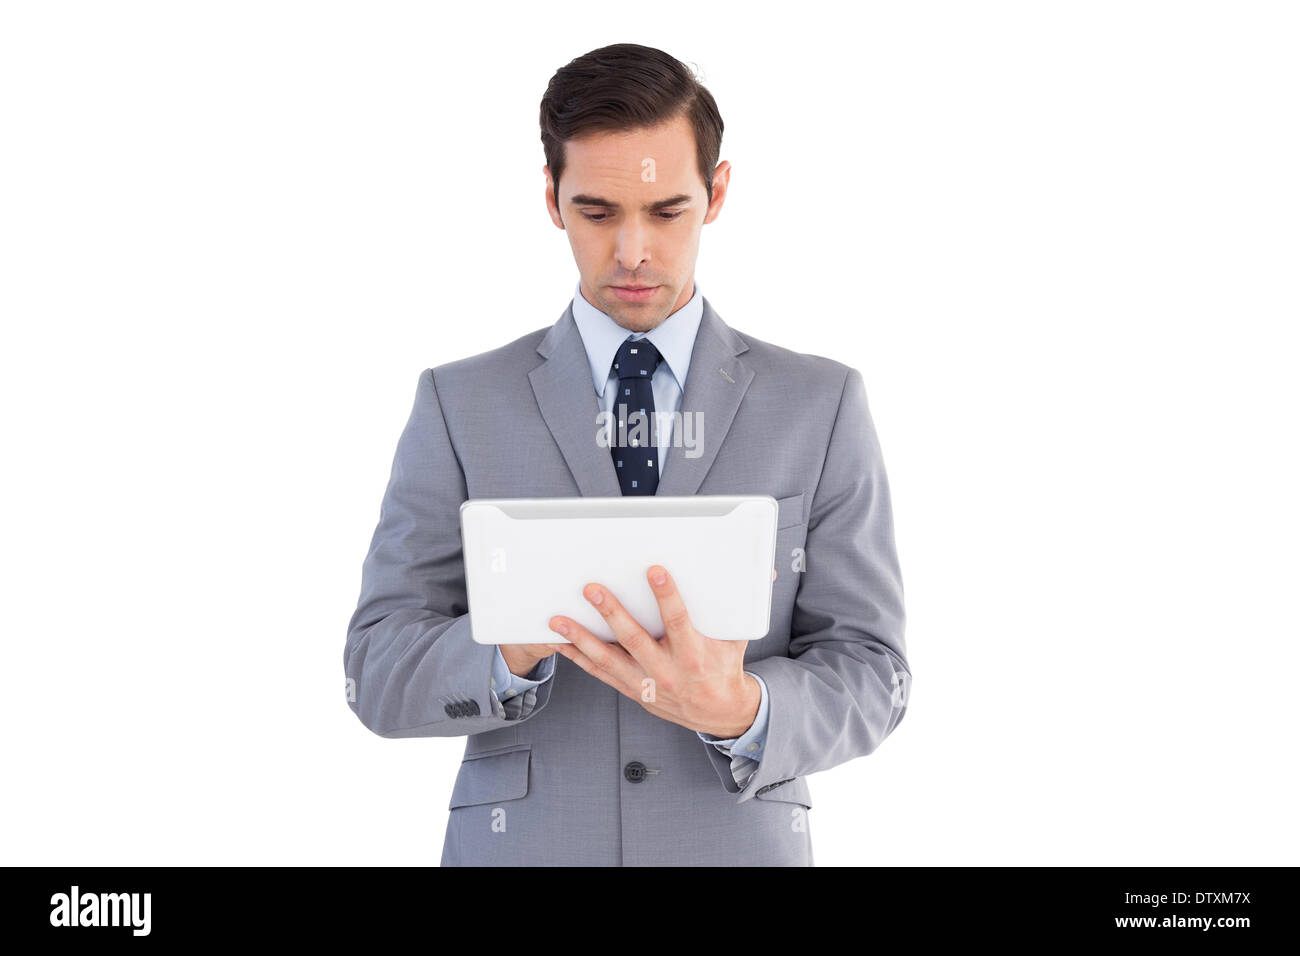 Businessman holding a tablet computer Stock Photo